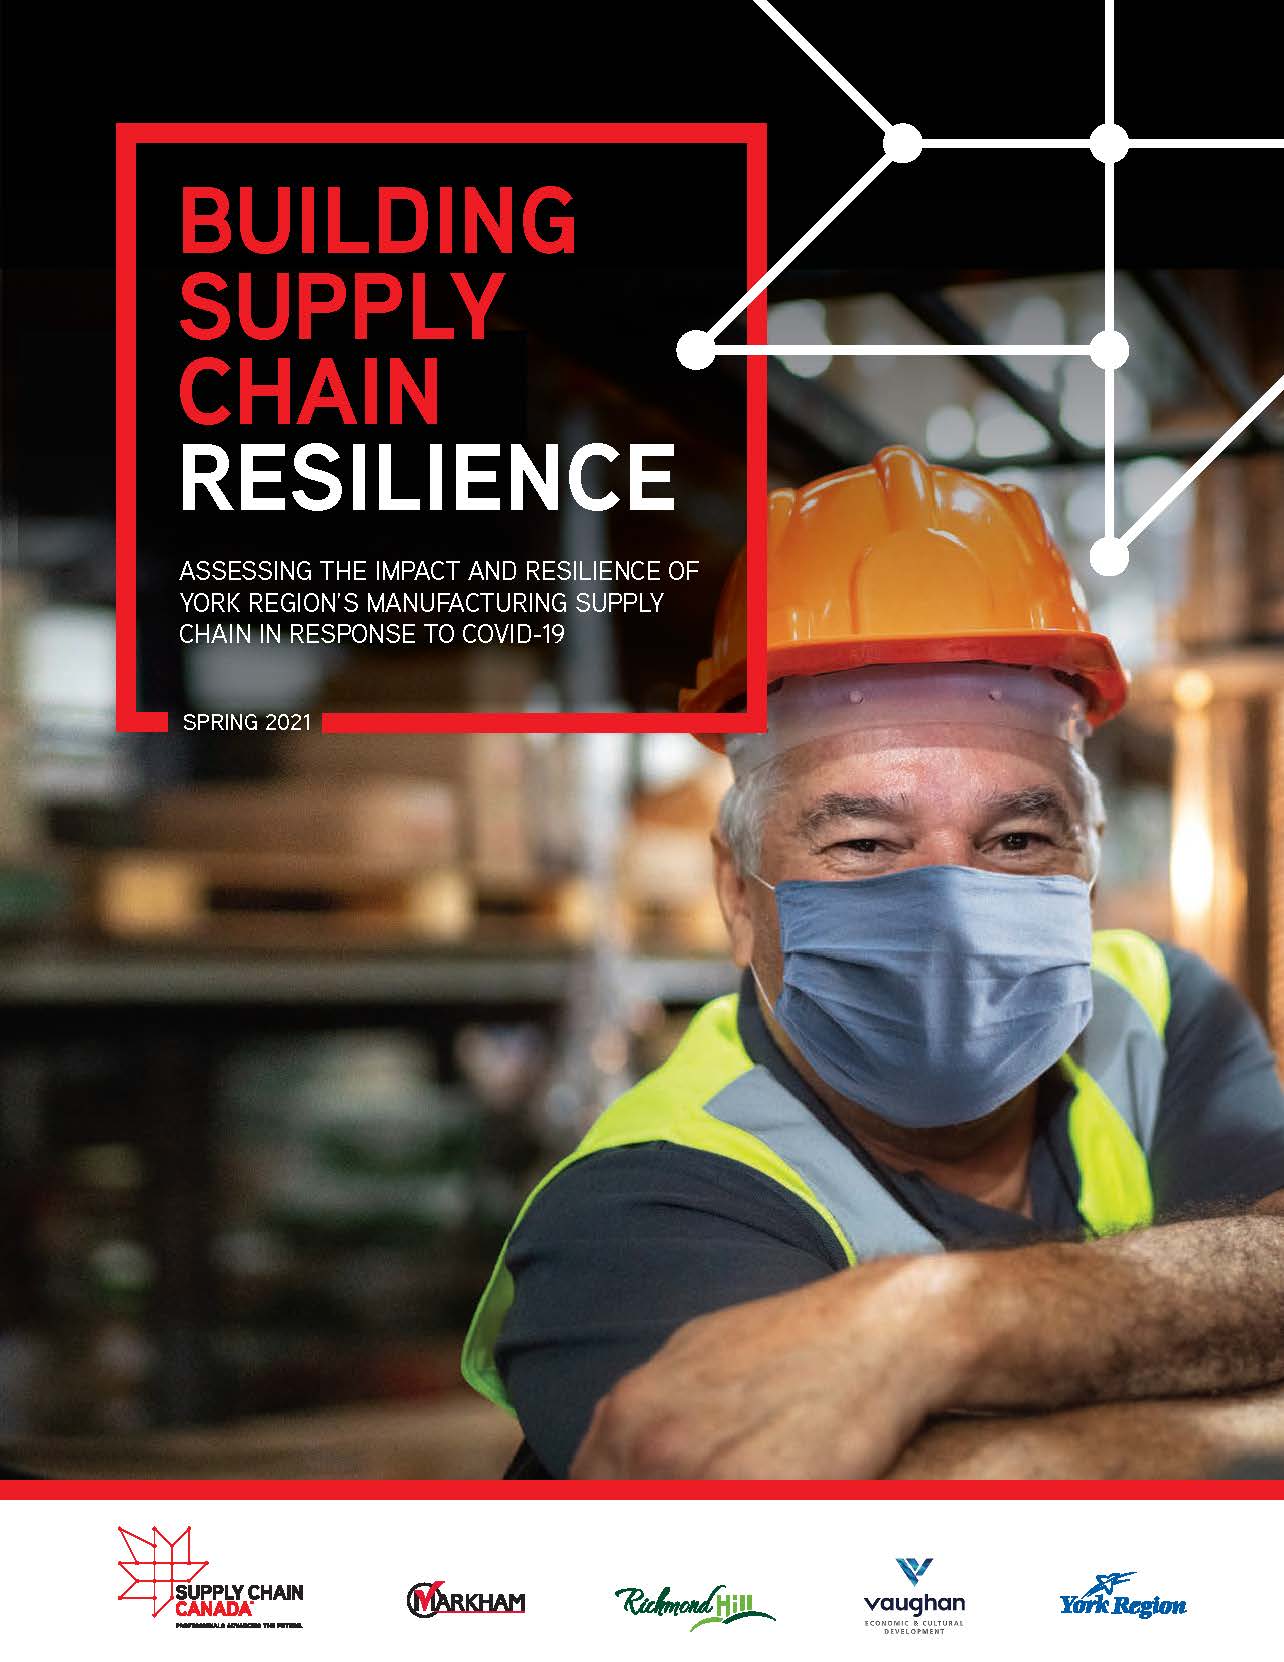 Report: Building Supply Chain Resilience: Assessing the Impact and Resilience of York Region's Manufacturing Supply Chain in Response to COVID-19